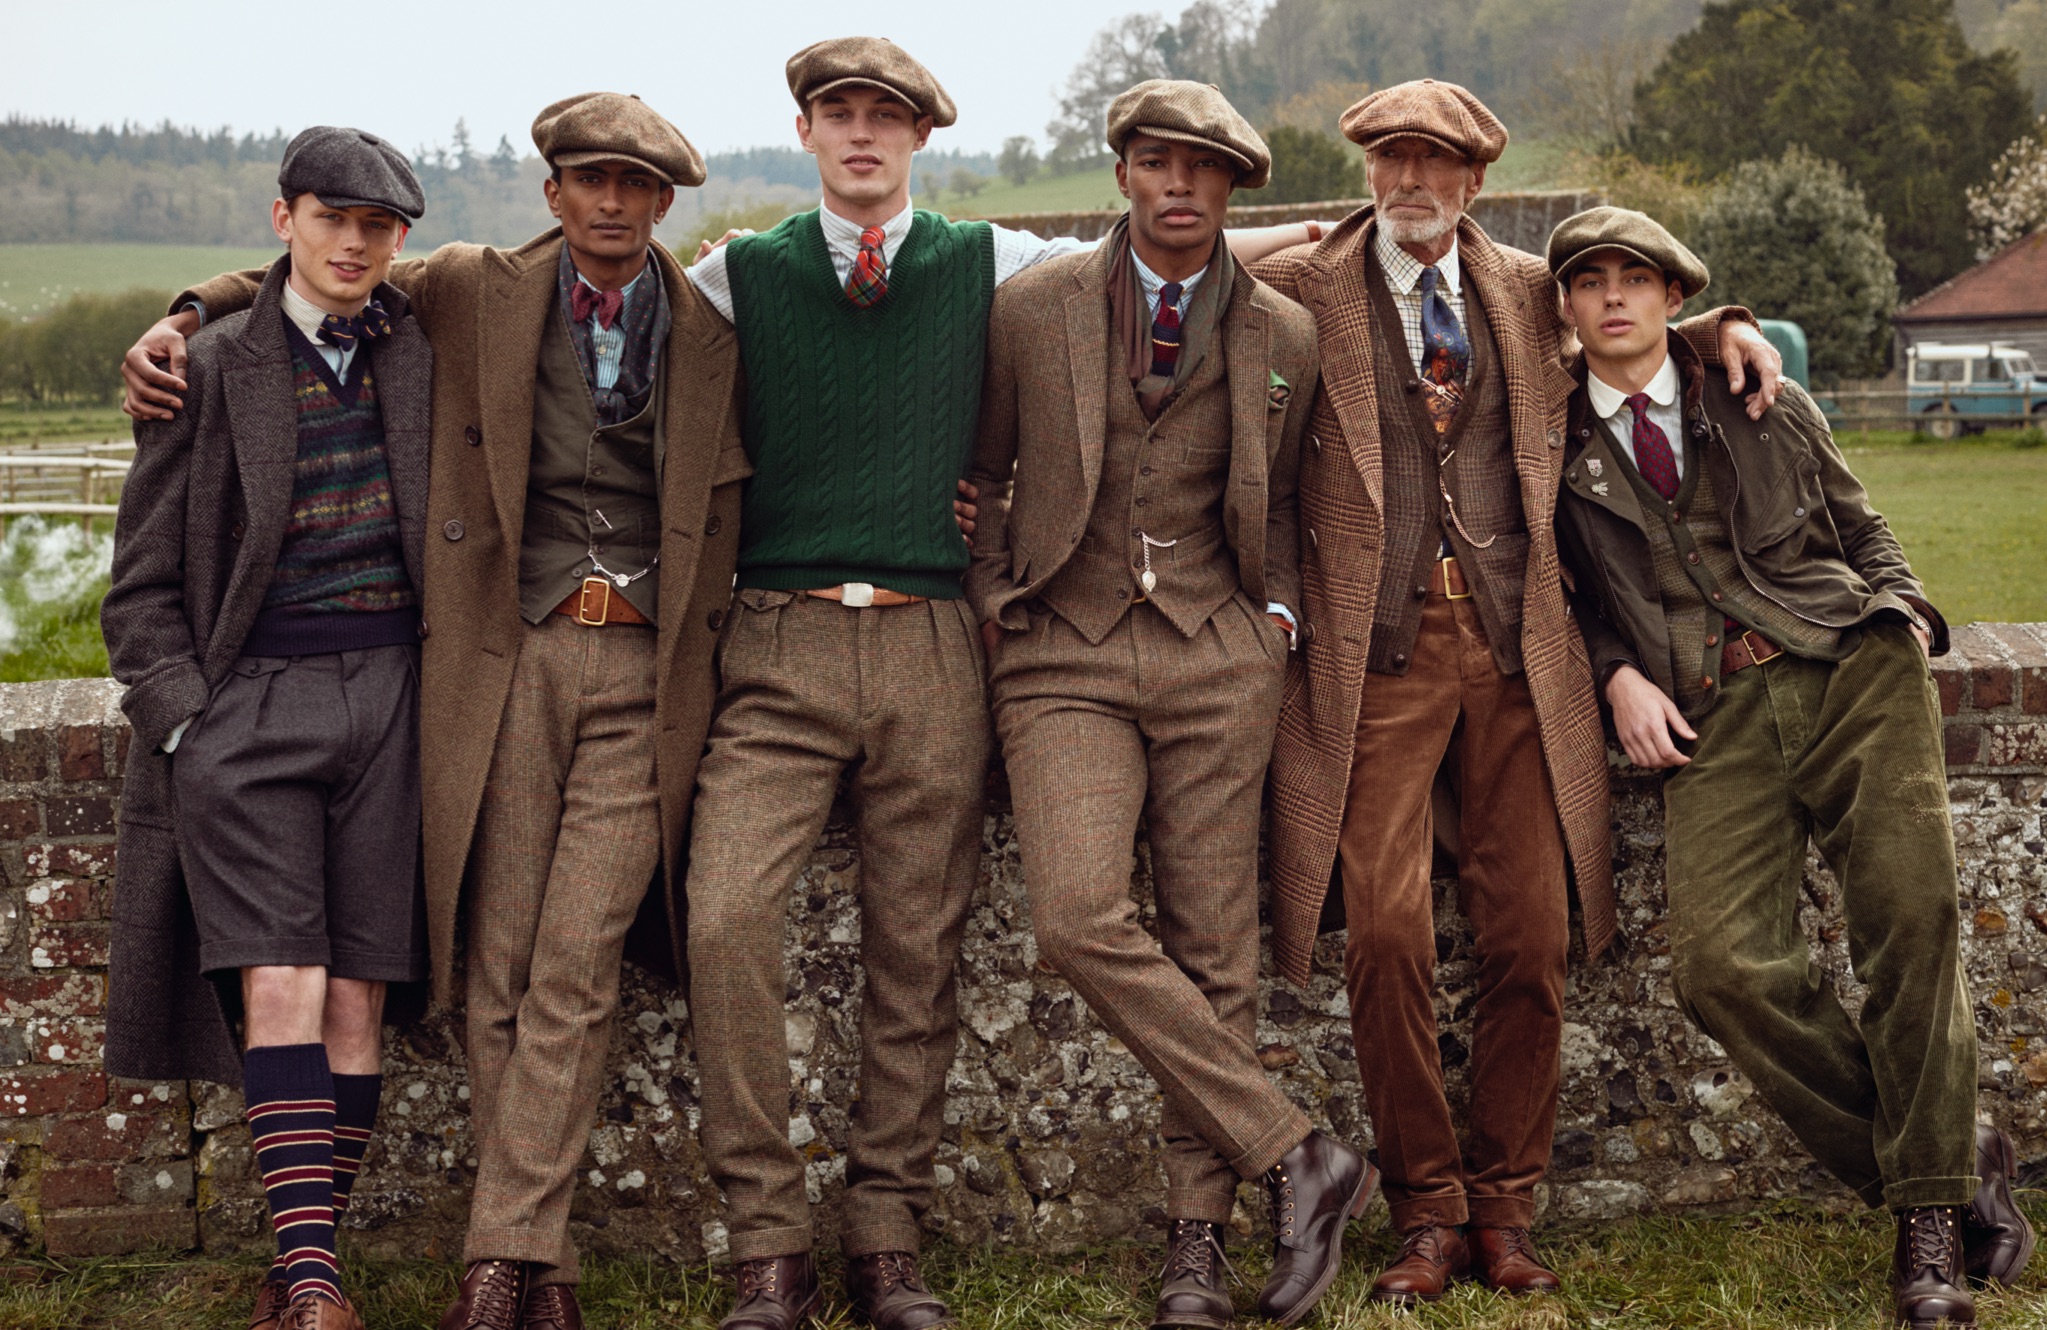 <strong>CROSS COUNTRY </strong><br/><span>The current collection of Polo Originals uses tweed as texture, creating a look that is drawn from classic menswear but combined with unexpected pieces of workwear - a twill vest, mended cords, cap-toe boots, and double-pronged belts</span><br/><rlmag_link href="https://www.ralphlauren.global/dz/en/search?cgid=brands-prl-ties-and-tweed-cg"><button class="shop-collection">Shop the Story</button></rlmag_link>